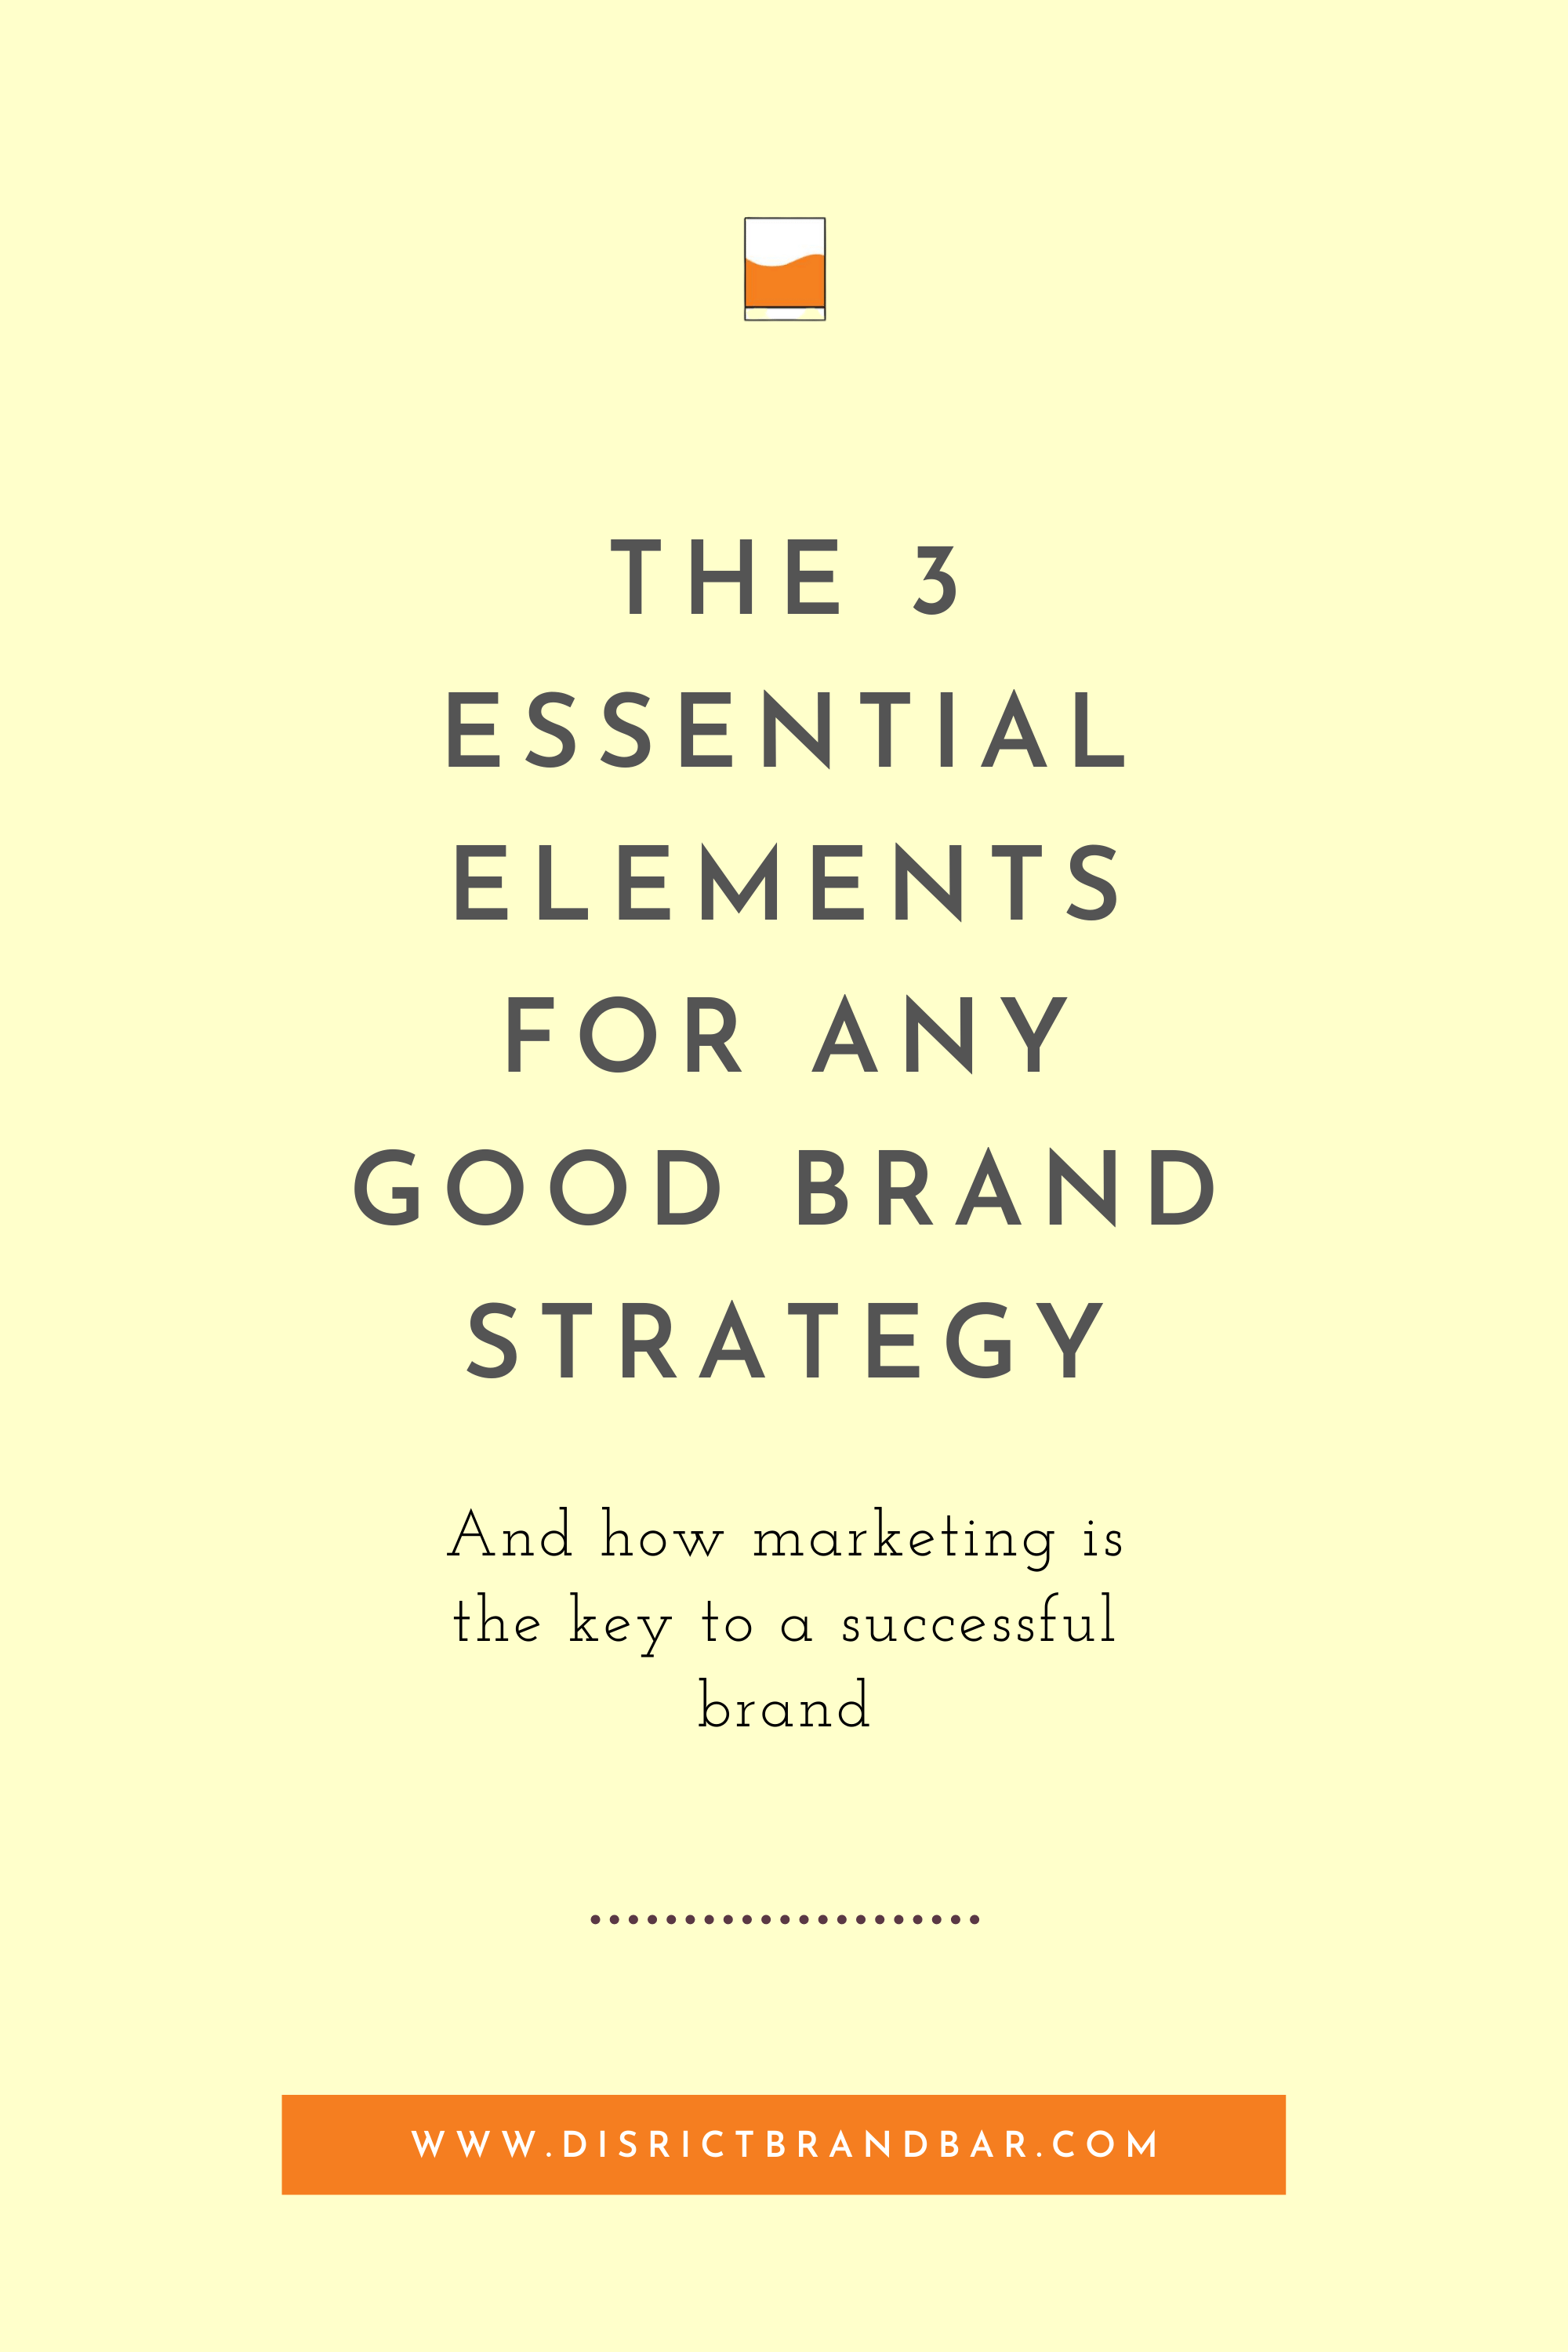 The 3 Essential Elements for Any Brand Strategy